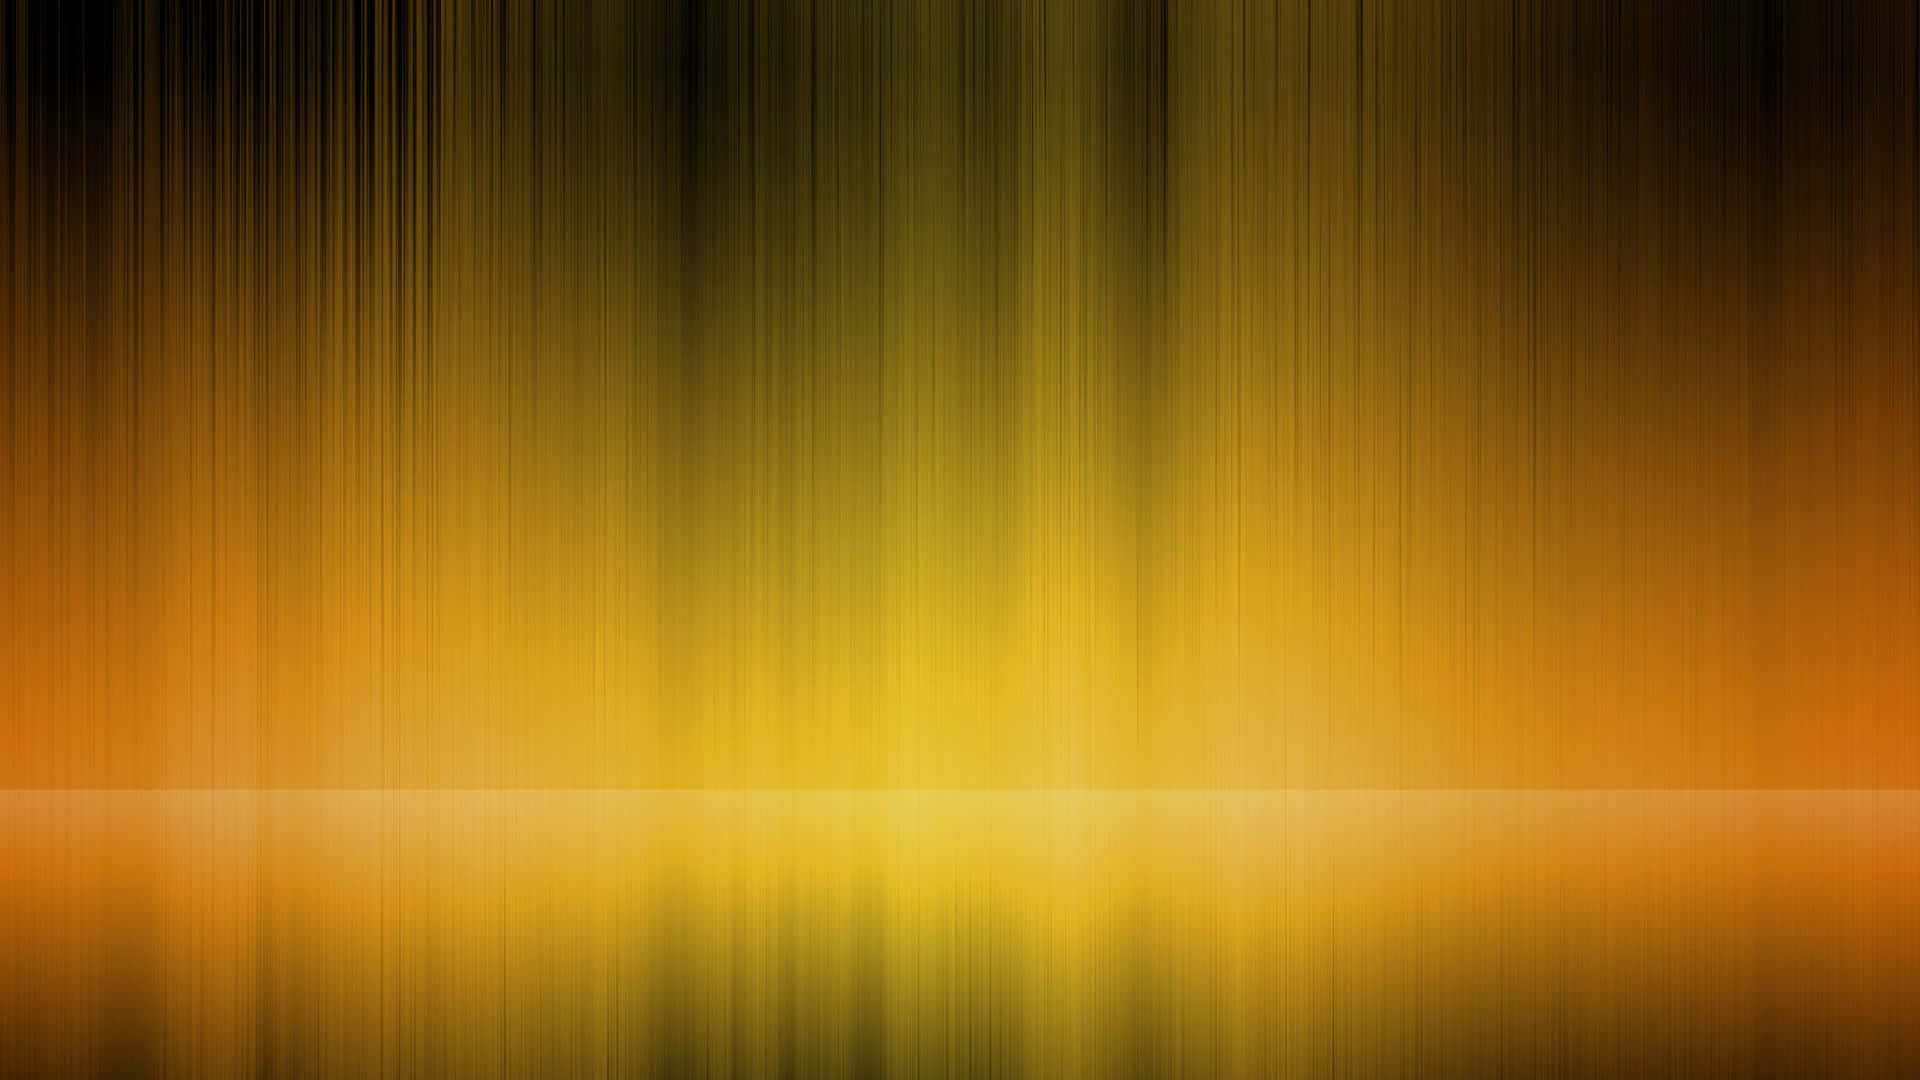 A bright yellow and black abstract design